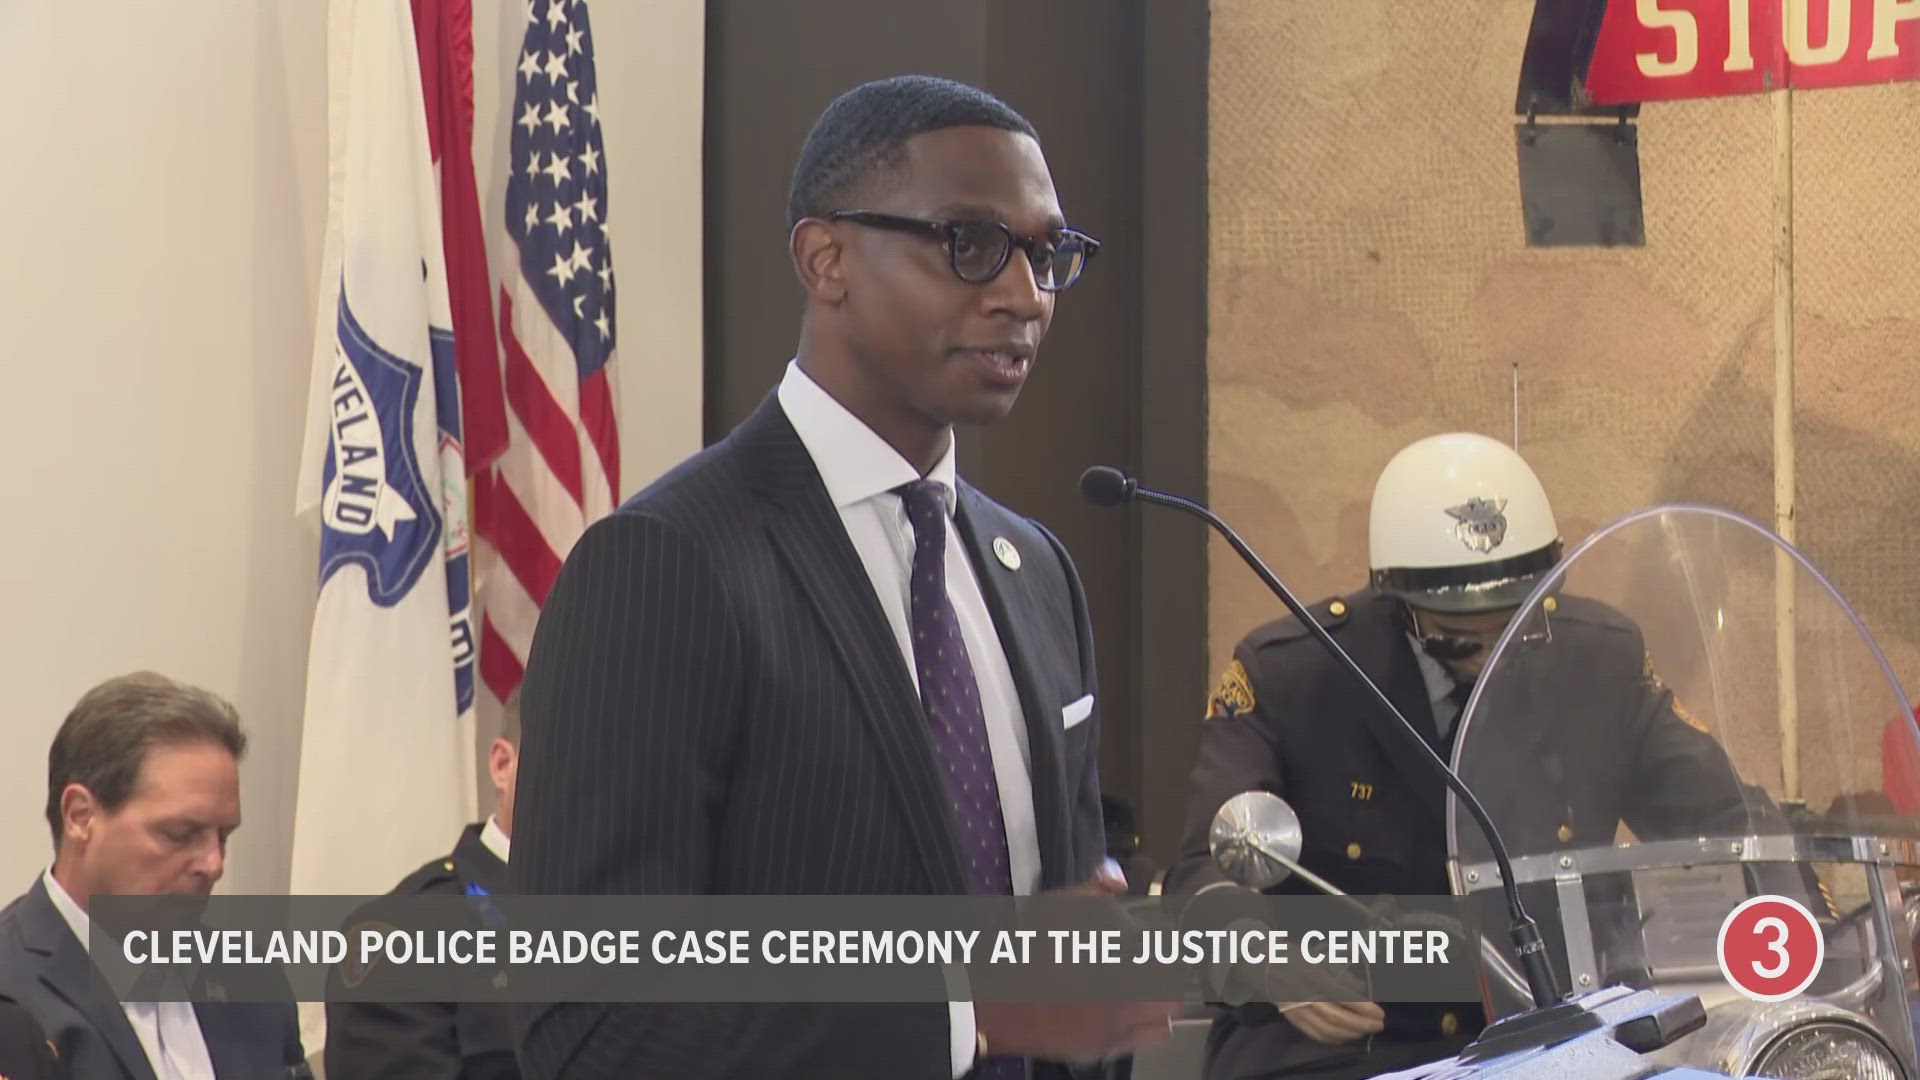 Bibb reflected on the recent loss of Euclid police officer Jacob Derbin during his remarks at the Cleveland Police Badge Case Ceremony.